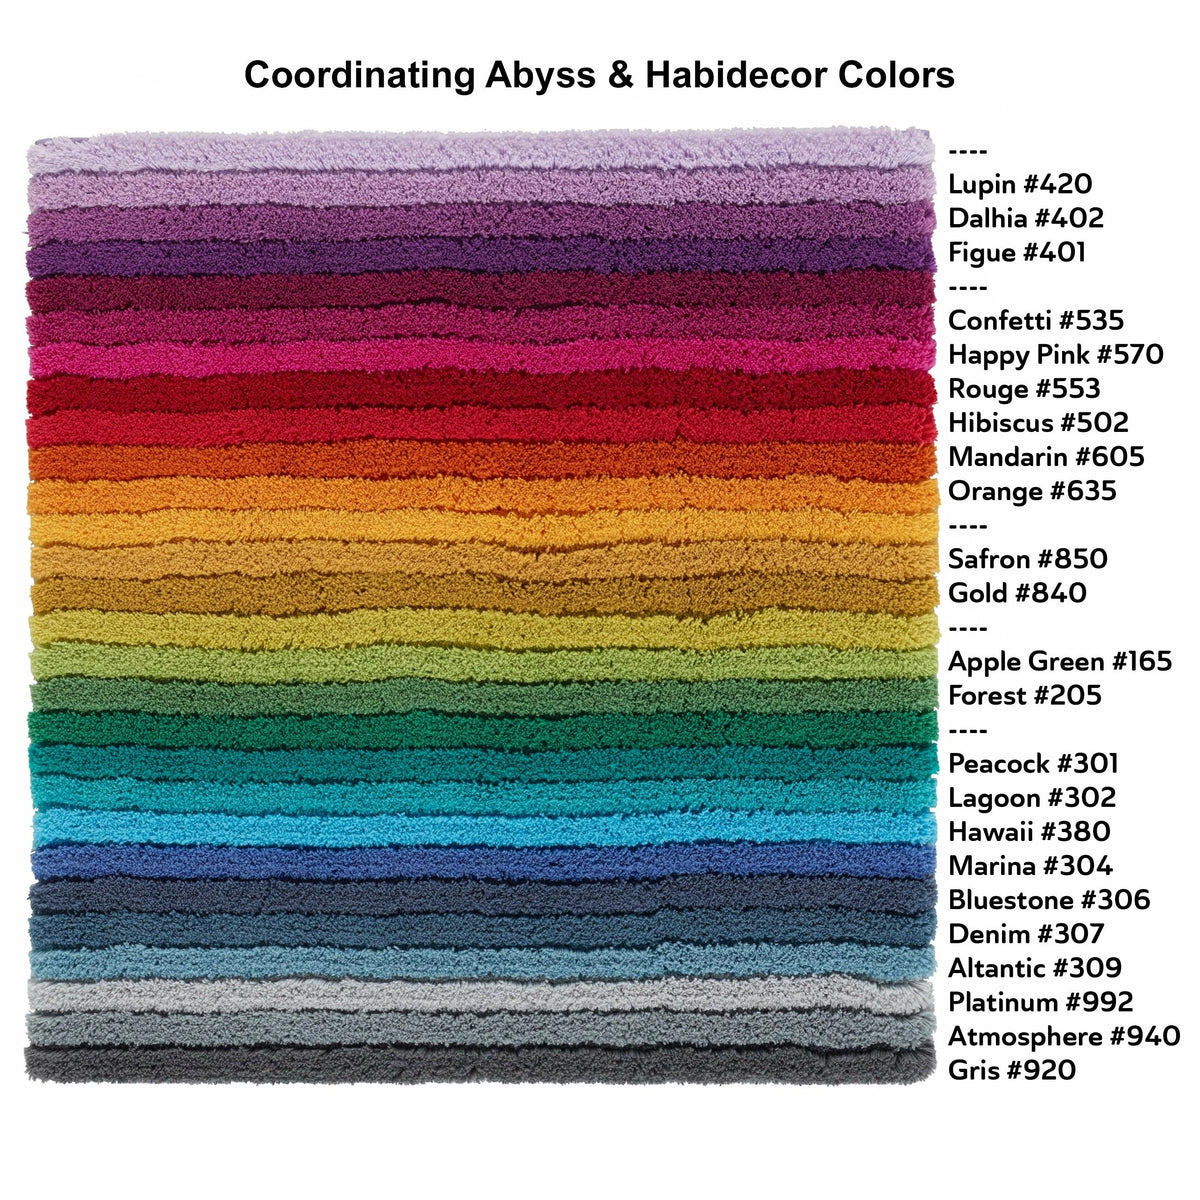 Abyss Habidecor Larry Bath And Area Rugs Details Multi (400) Fine Linens